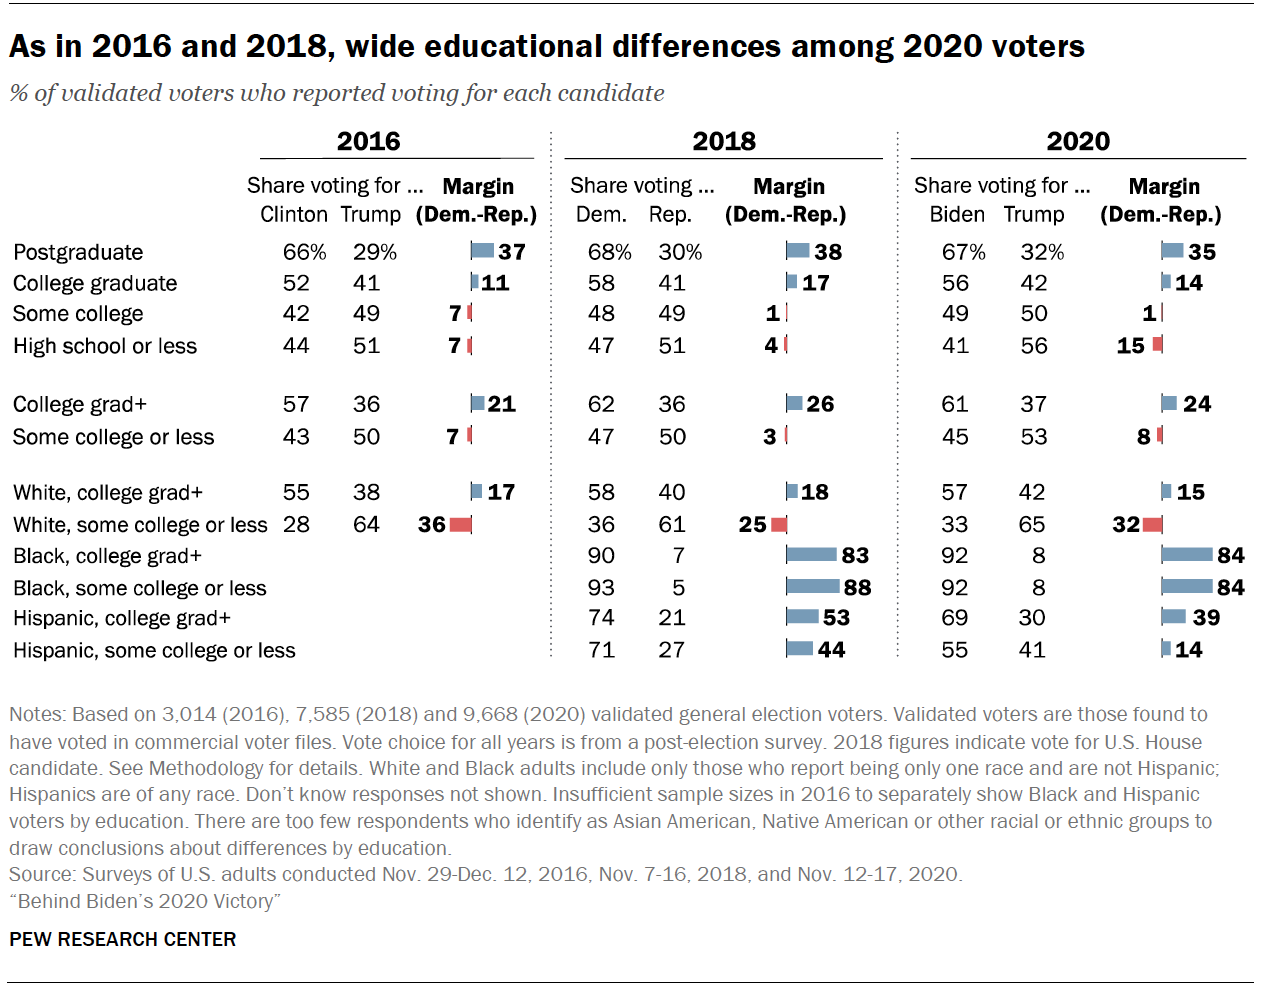 Share of 2016 and 2020 voters by education